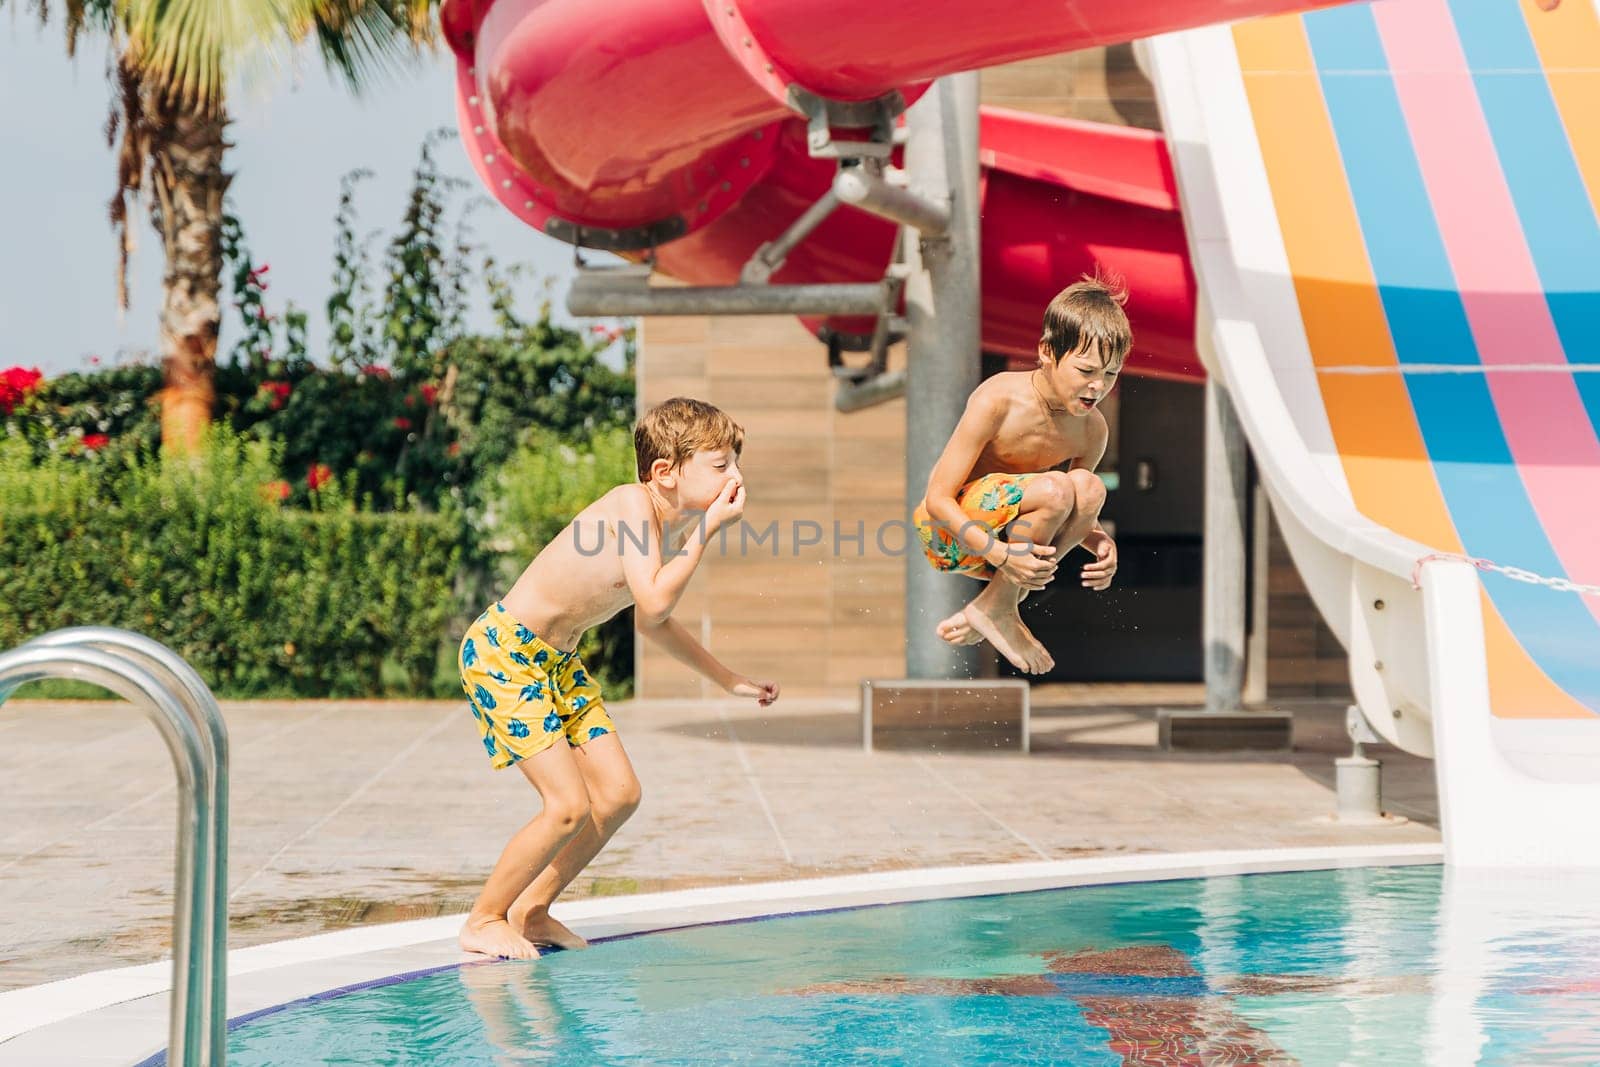 Two brothers Childs jumping and playing in swimming pool at sunny day. Kids friends boys refreshing at heat weather, active vacation and healthy lifestyle. Happy summer.